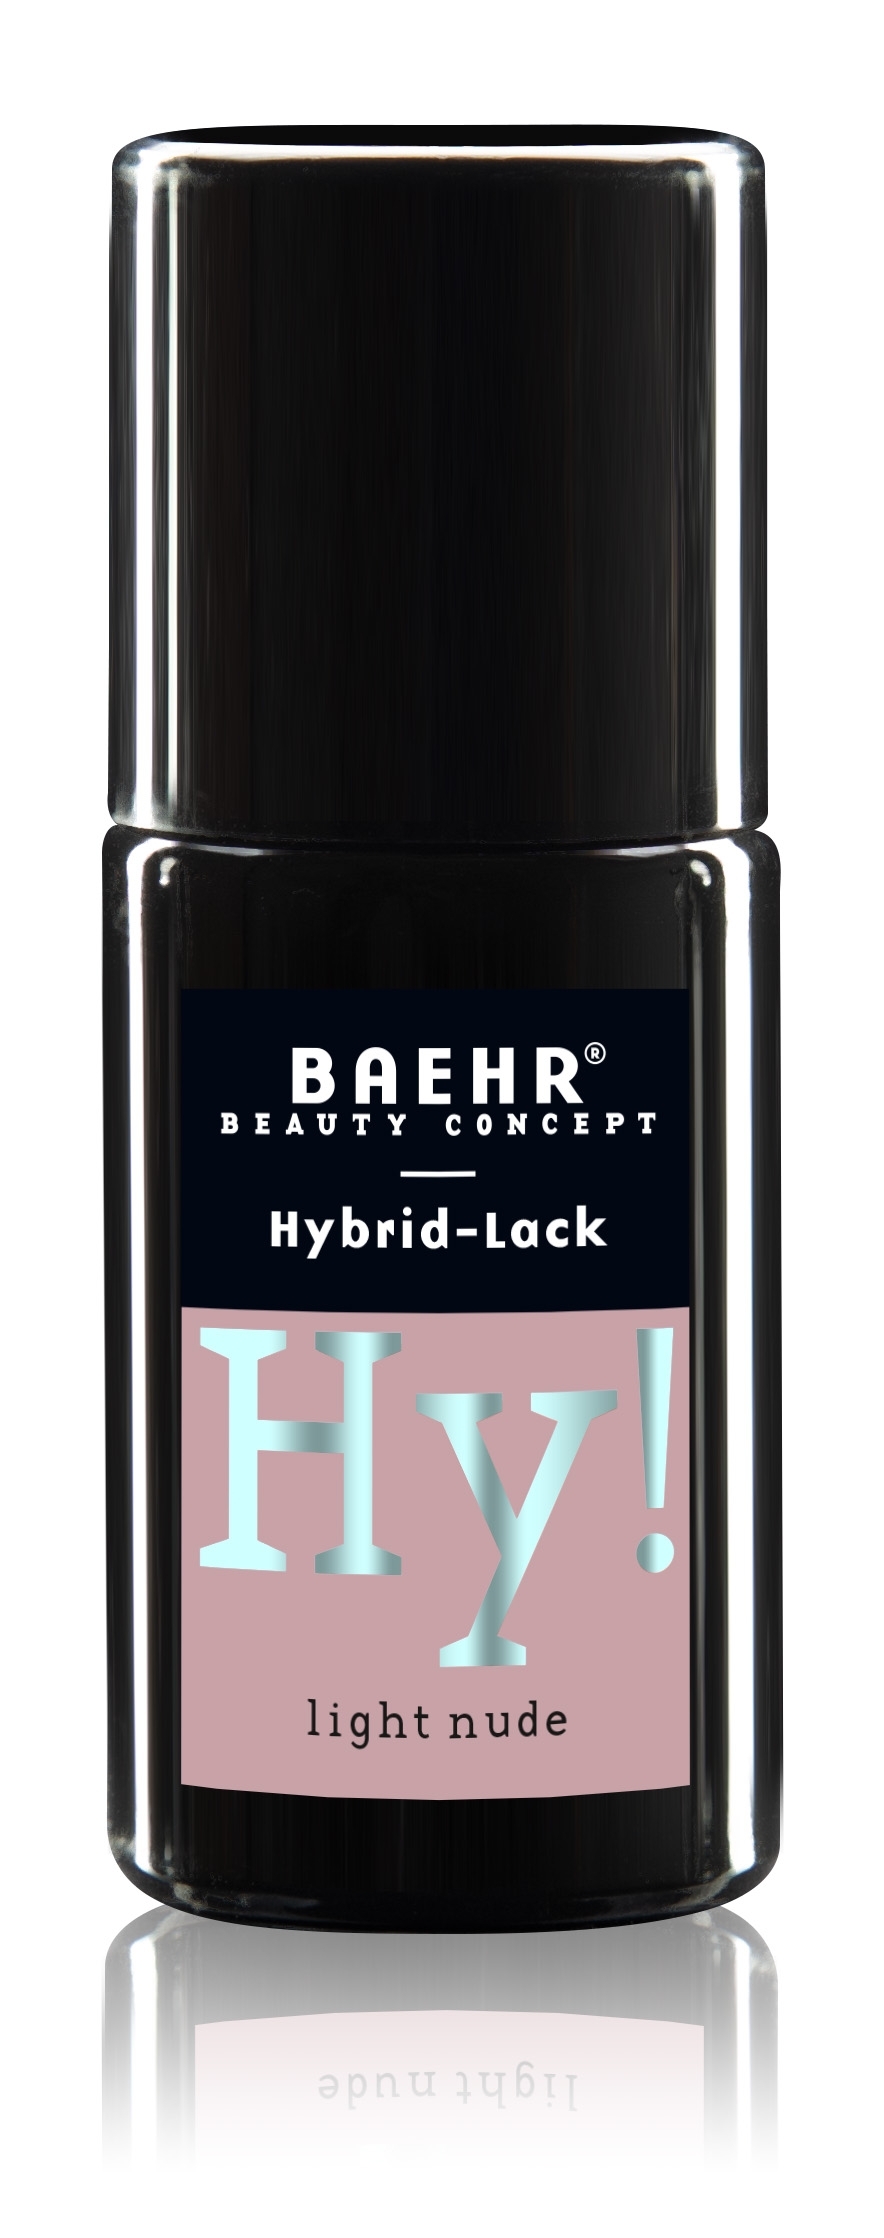 BAEHR BEAUTY CONCEPT - NAILS Hy! Hybrid-Lack, light nude 8 ml